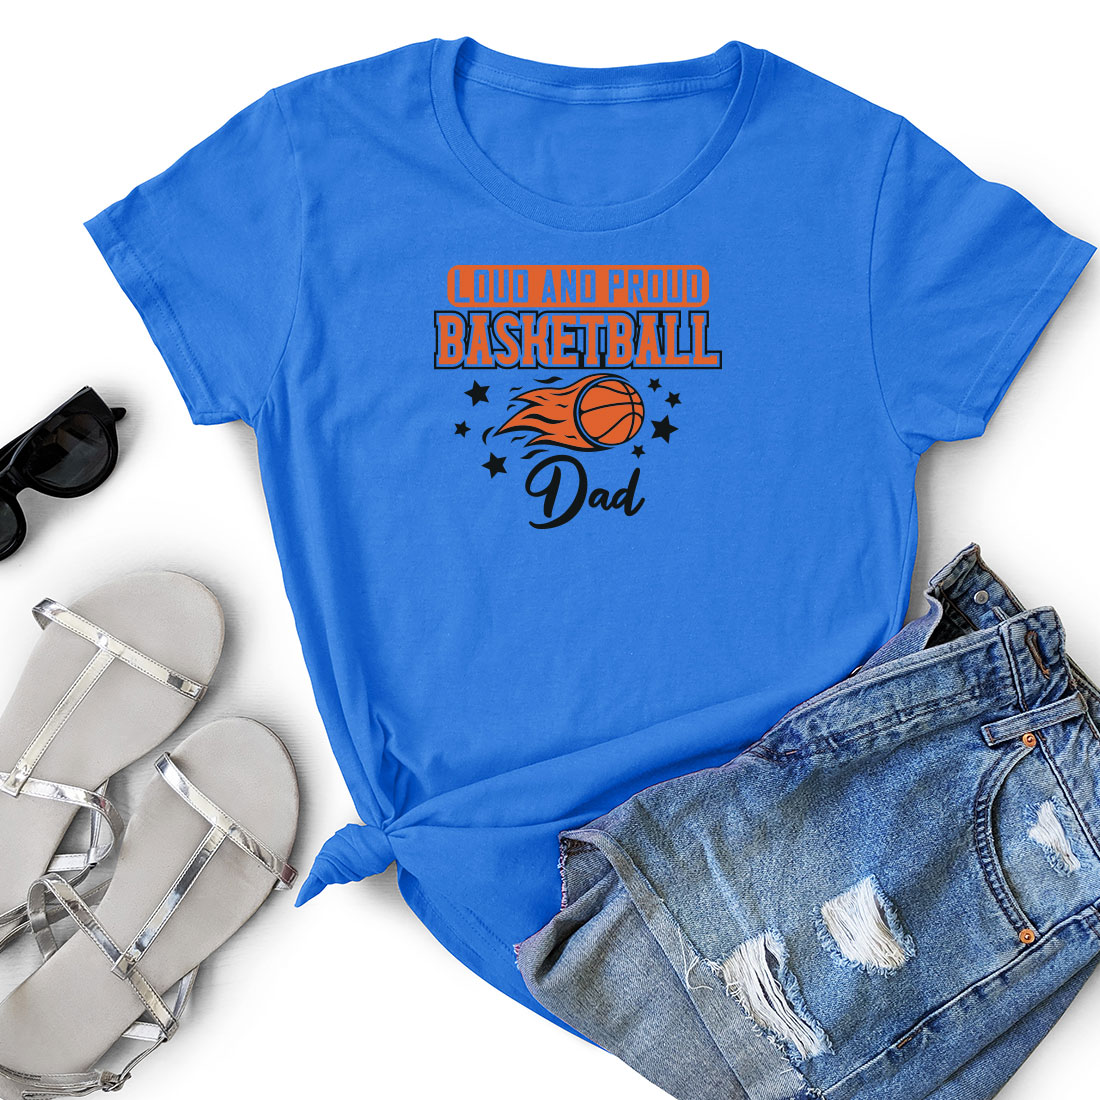 T - shirt that says basketball dad next to a pair of shorts.